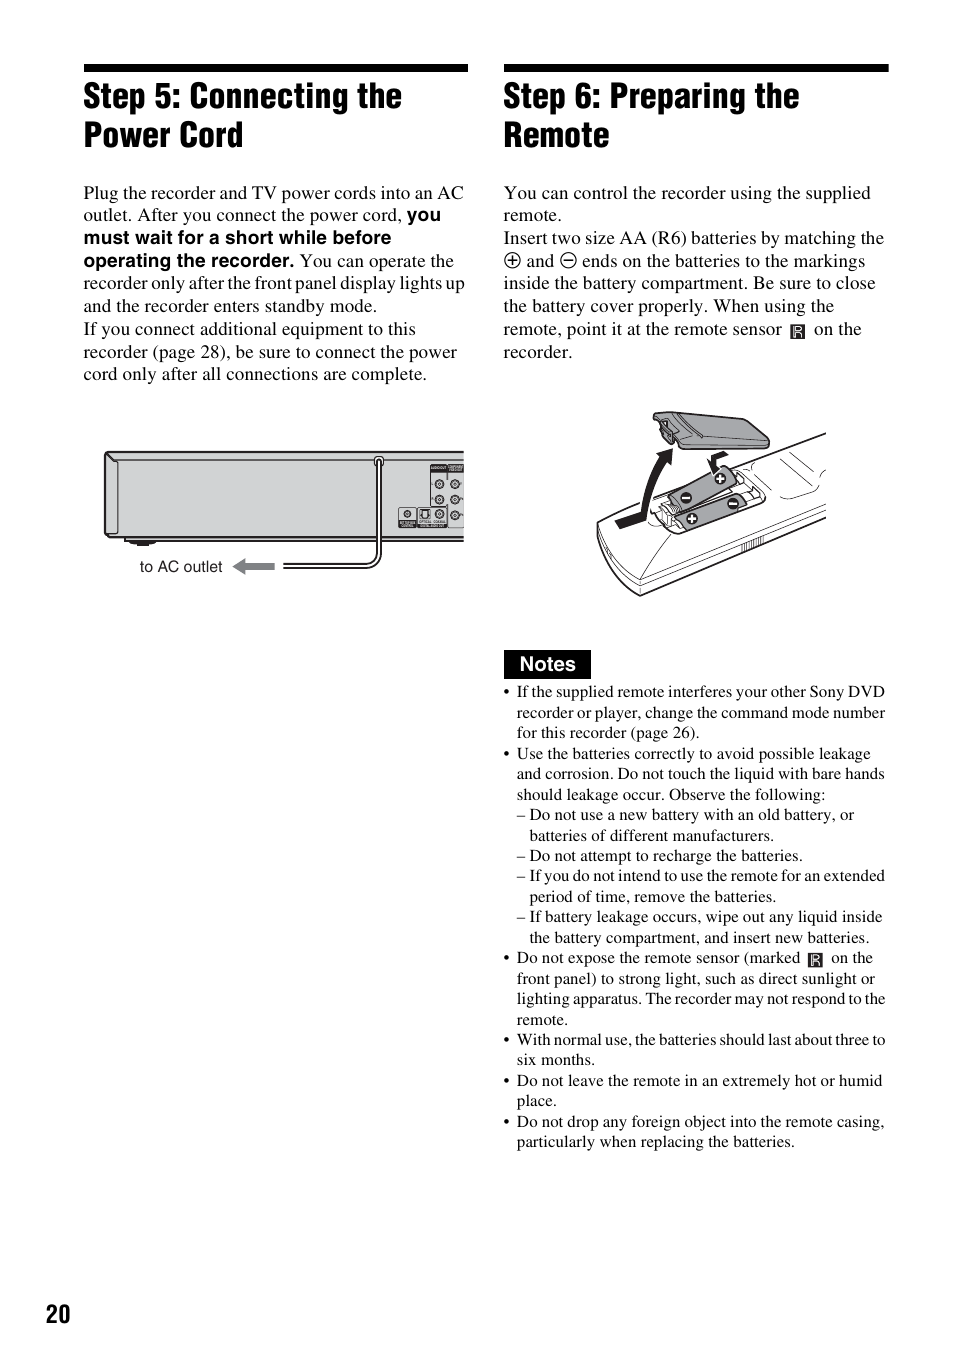 Step 5: connecting the power cord, Step 6: preparing the remote | Sony RDR-VX521 User Manual | Page 20 / 132